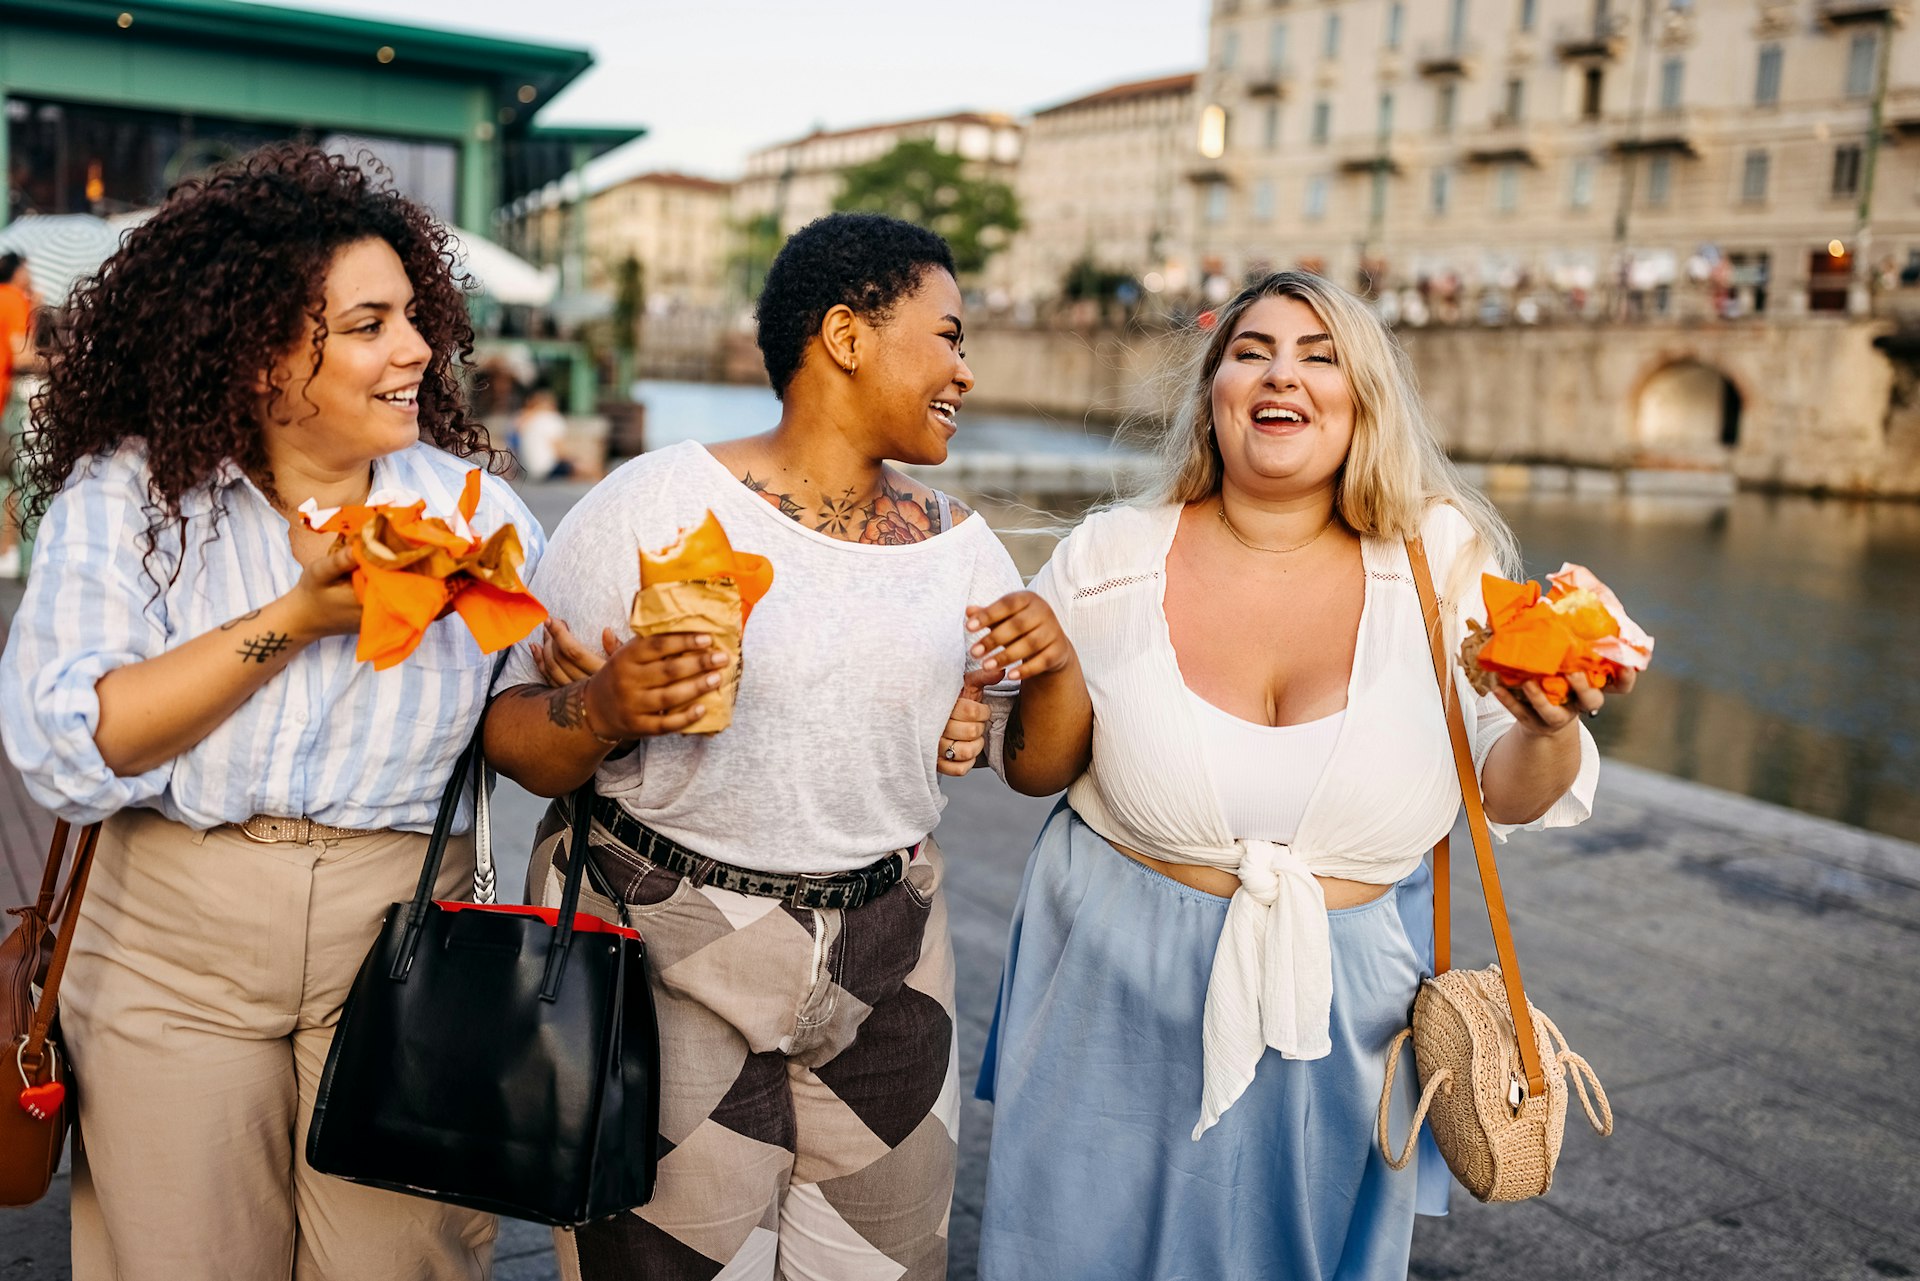 Three women eating fast food as they walk along a street in Italy